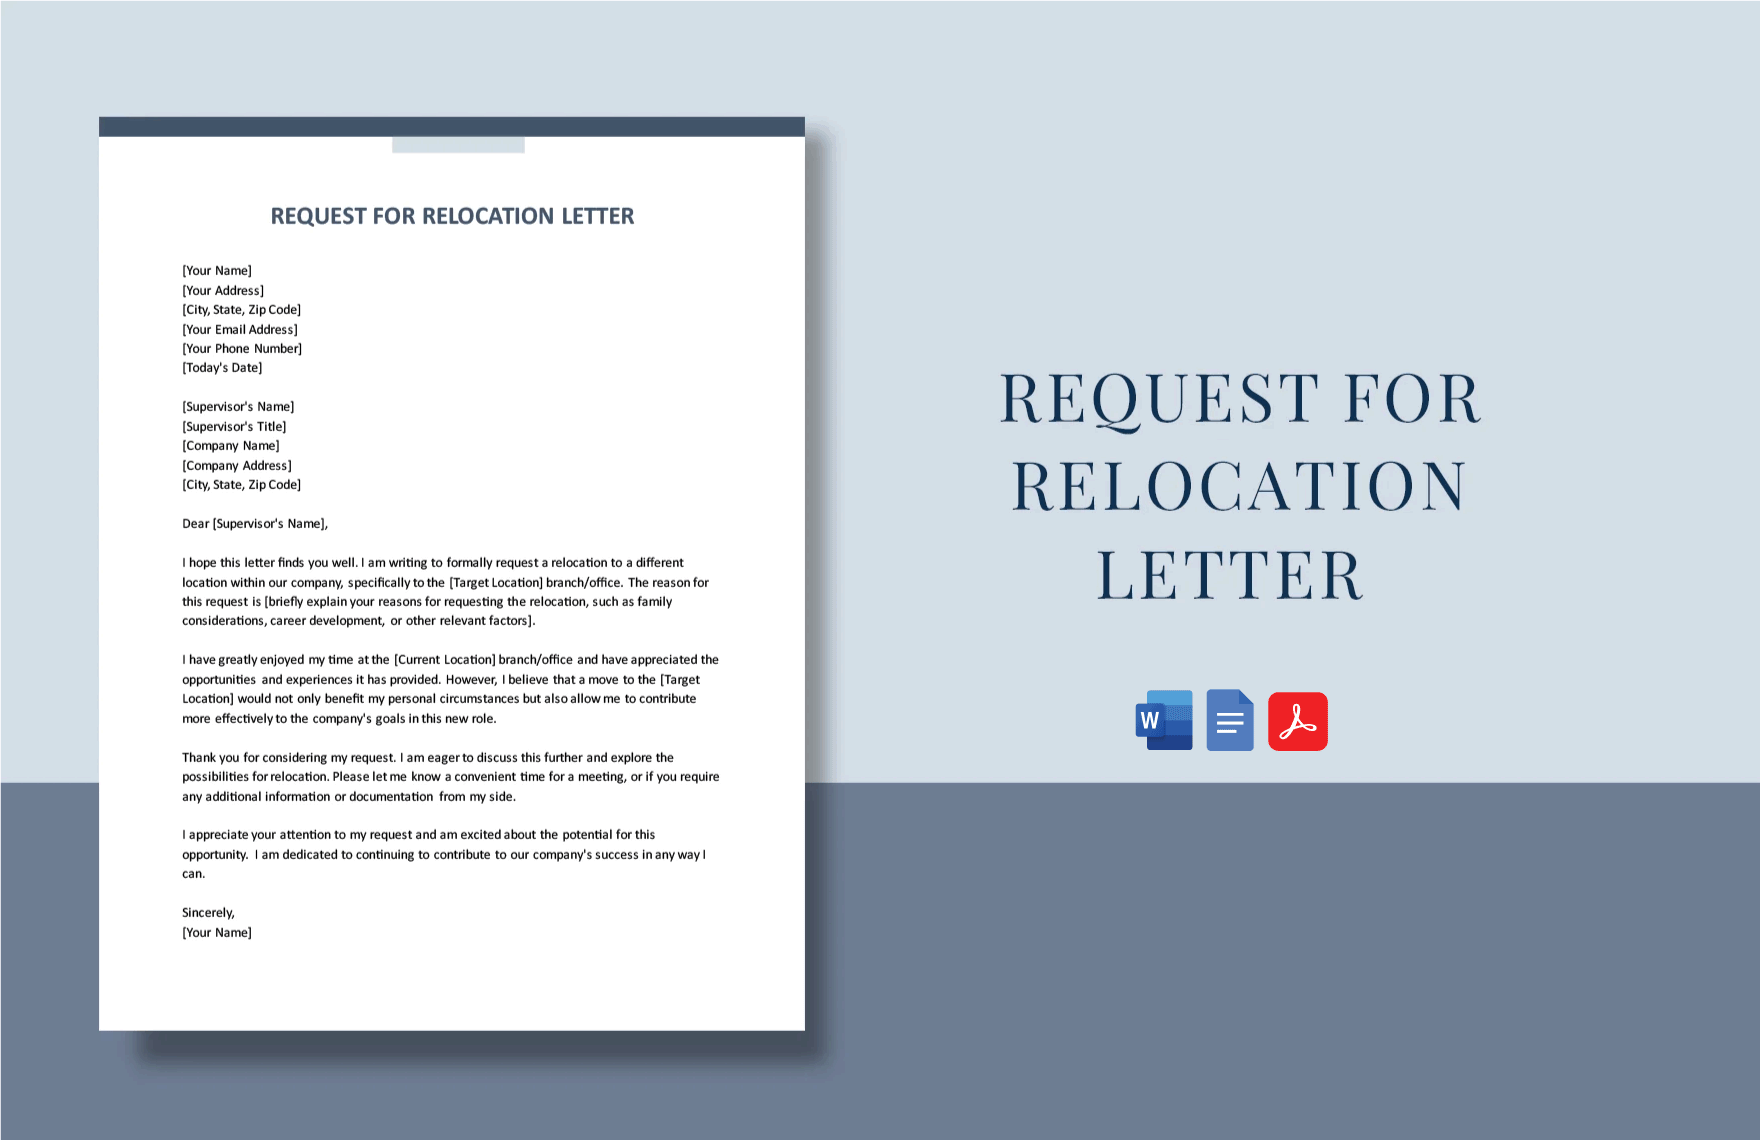 Request For Relocation Letter in Word, Google Docs, PDF